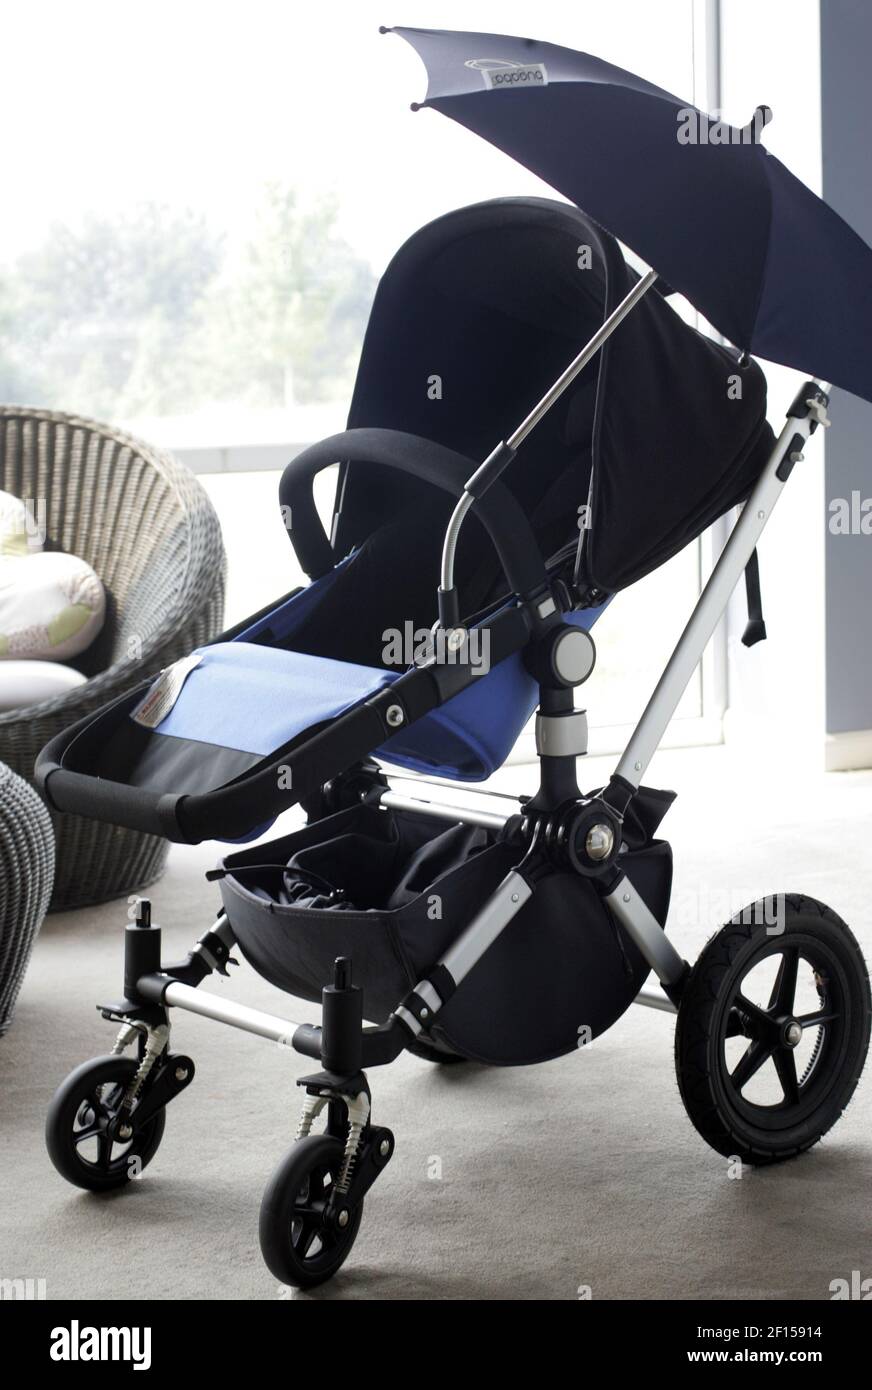 All that's missing are the rubber baby buggy bumpers, but the $900 Bugaboo  stroller has everything else, including inflatable tires and a parasol.  (Chris Oberholtz/Kansas City Star/MCT/Sipa USA Stock Photo - Alamy